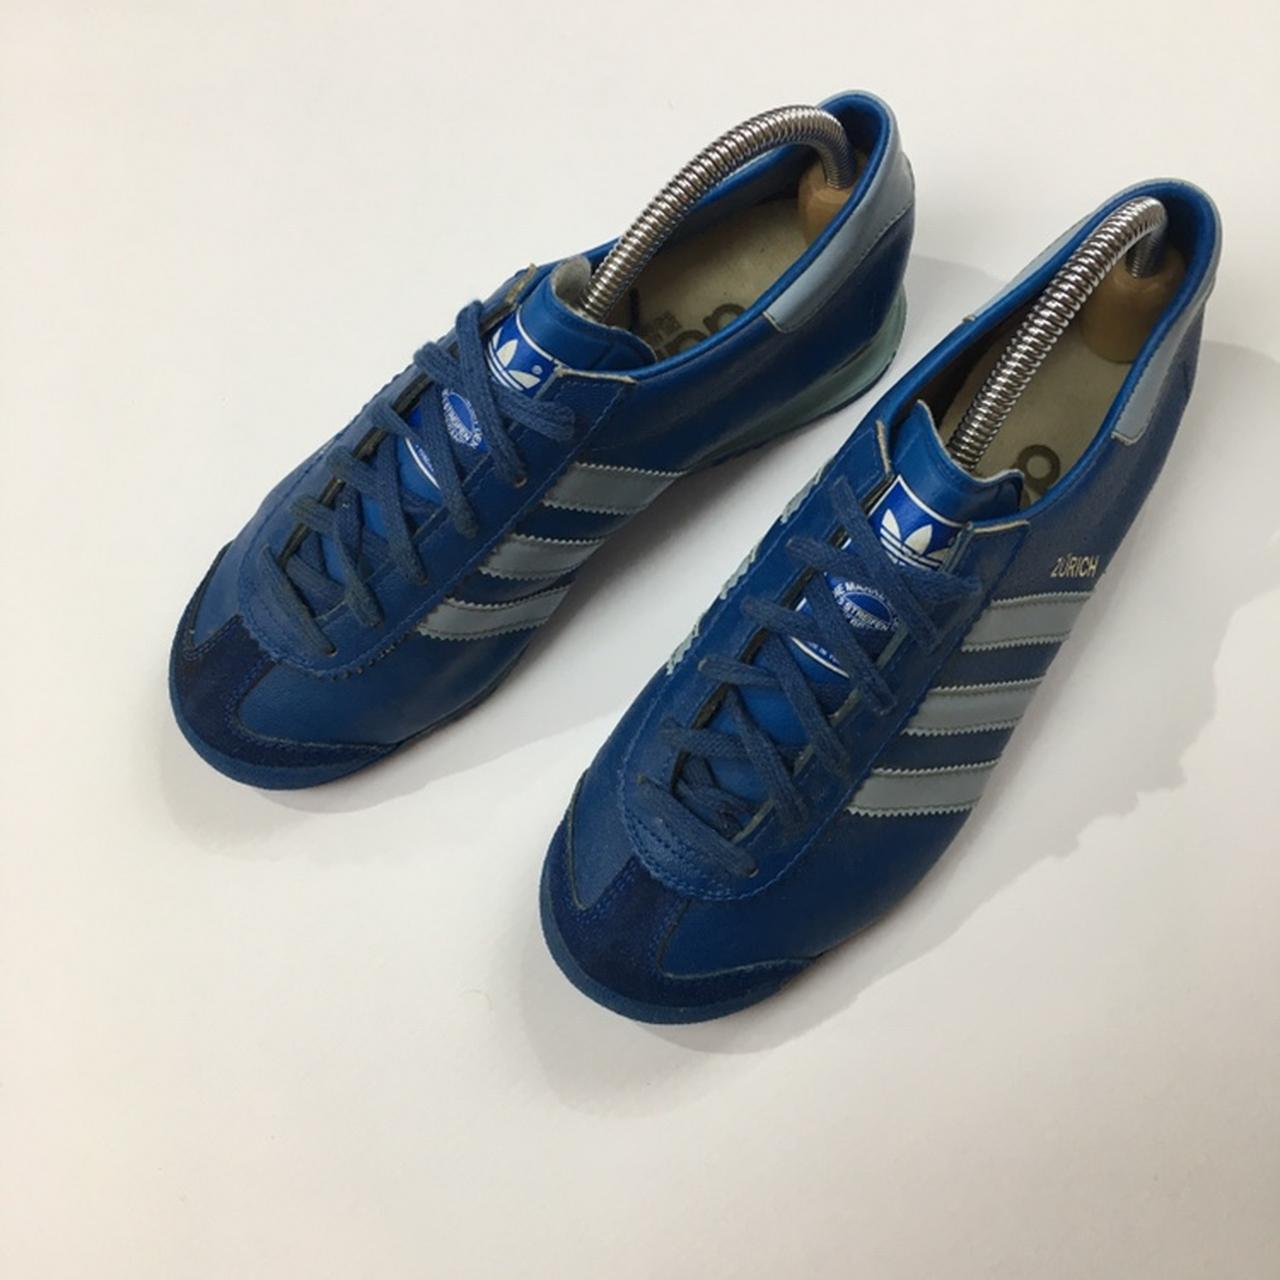 RARE Vintage 70-80s Adidas Zurich Shoes Trainers - UK 5 - Made in Yugoslavia